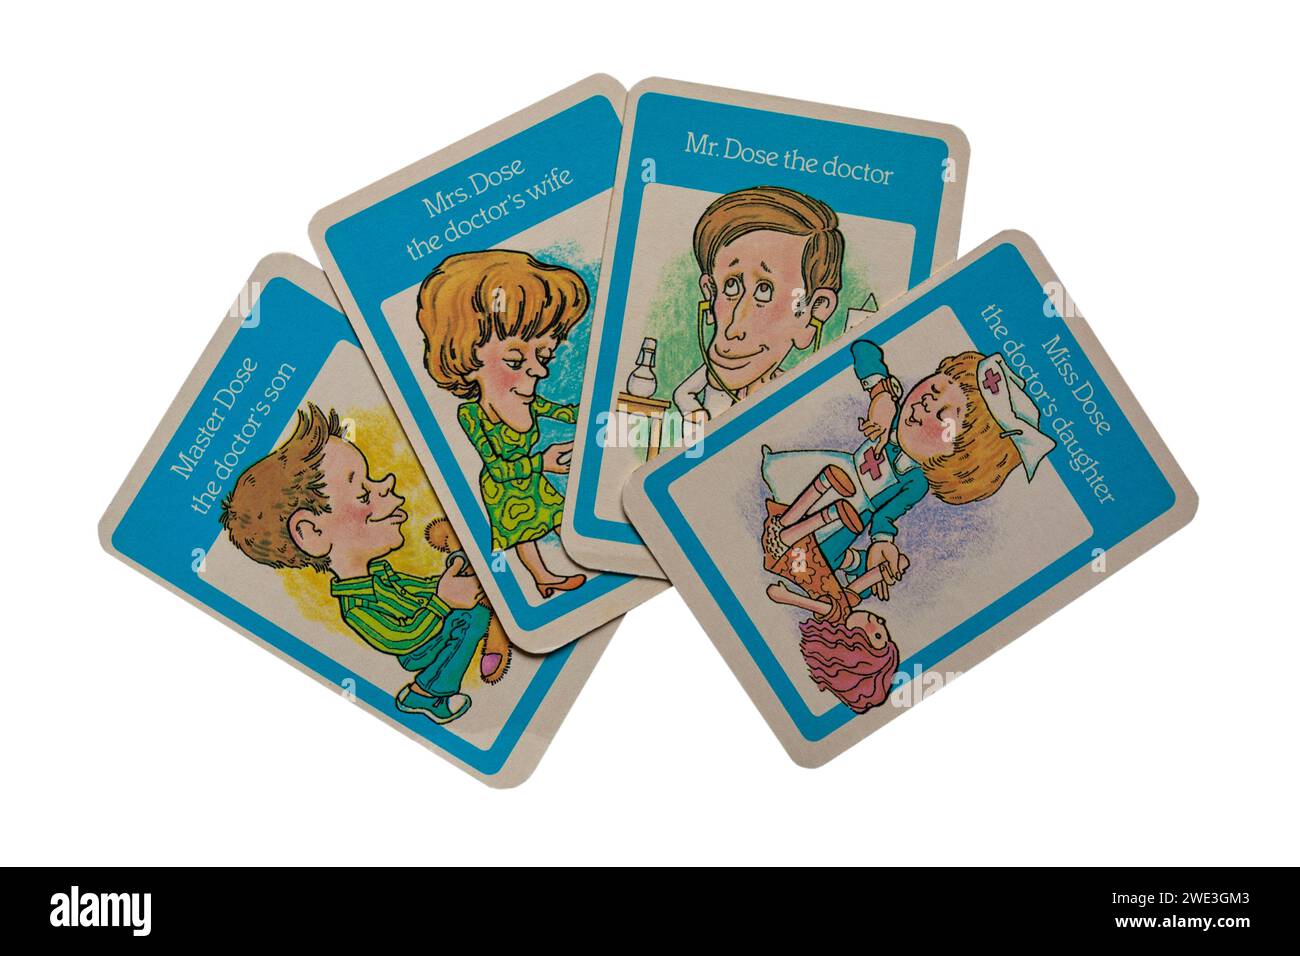 old retro Happy Families playing cards isolated on white background - the Dose Family, Mr Dose the Doctor with wife, son and daughter - UK Stock Photo